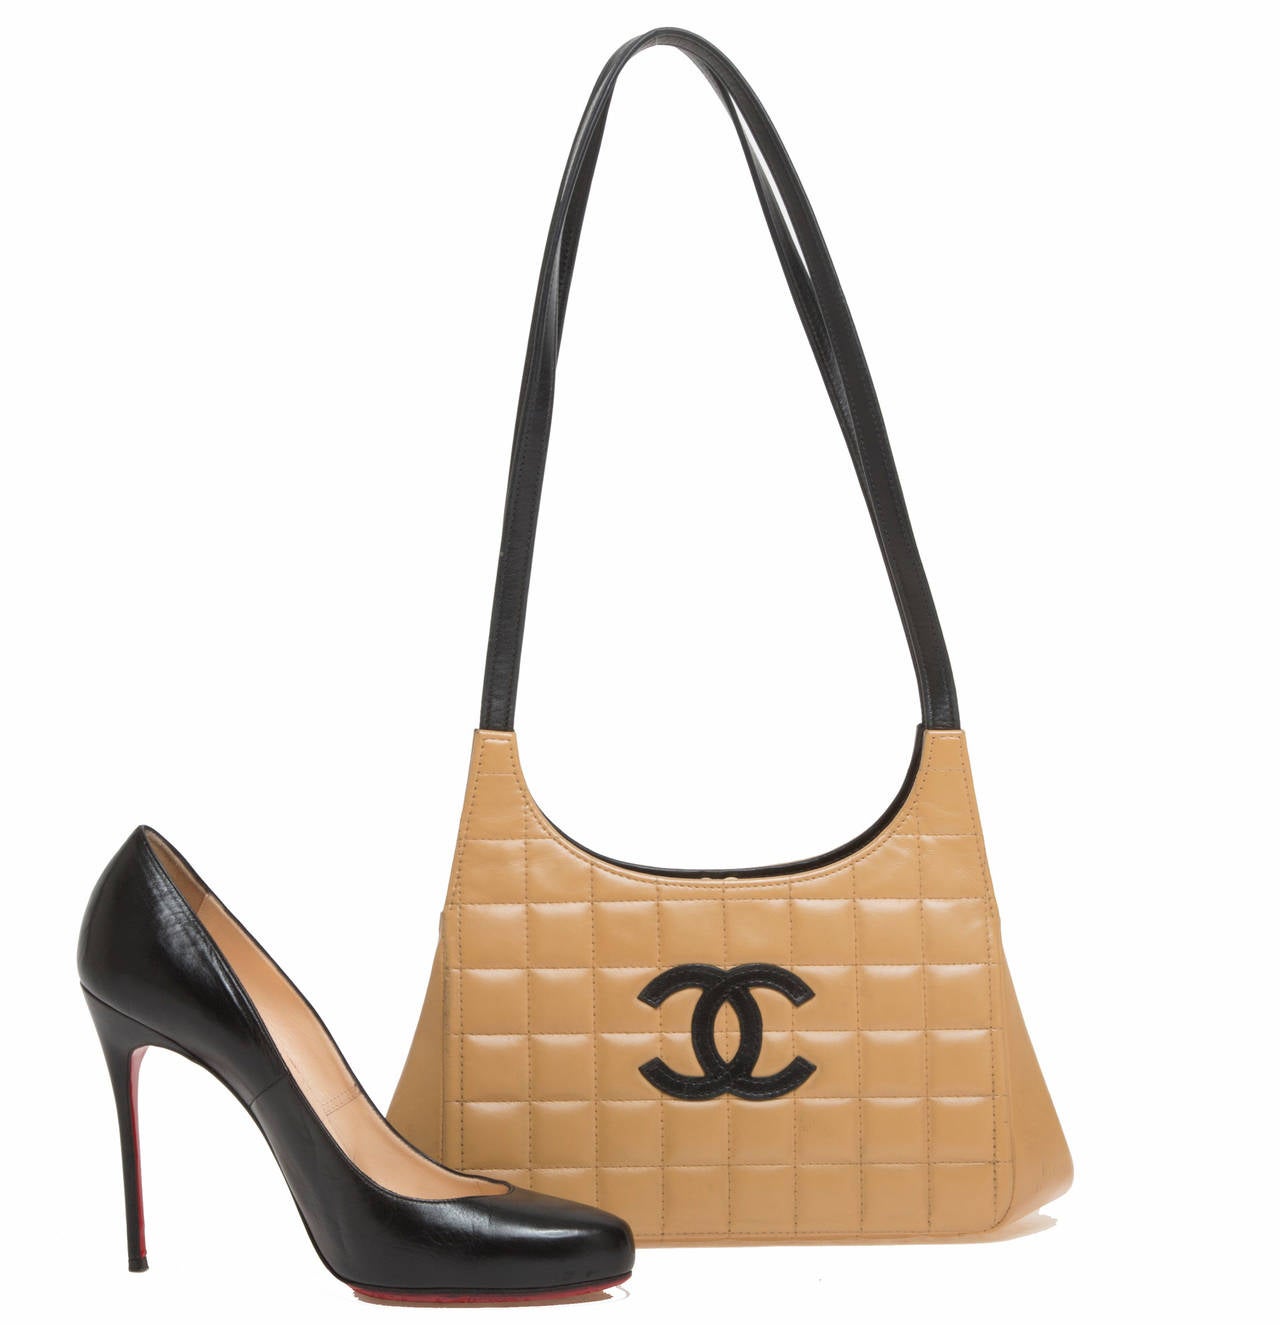 This chic Chanel Chocolate Bar Leather Shoulder Bag has an intricate design and certainly makes a statement. Constructed with soft beige leather, the bag dons square quilts and the signature double C logo in black leather on front. The smooth black